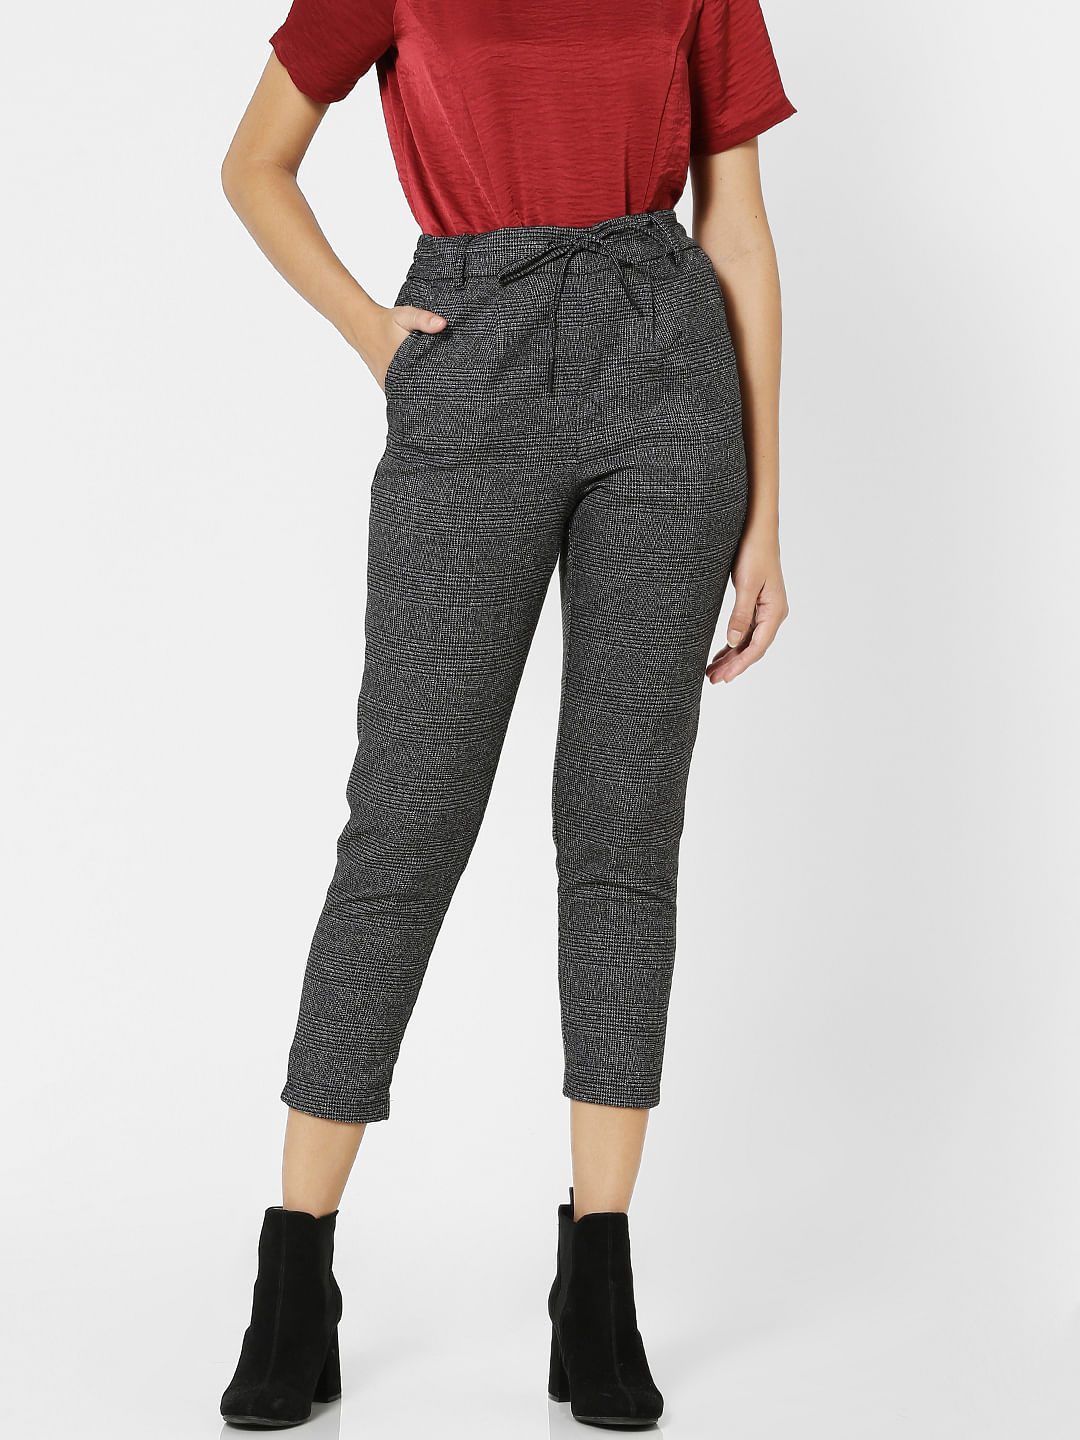 Shop Coral Women Trouser Pants Online in India